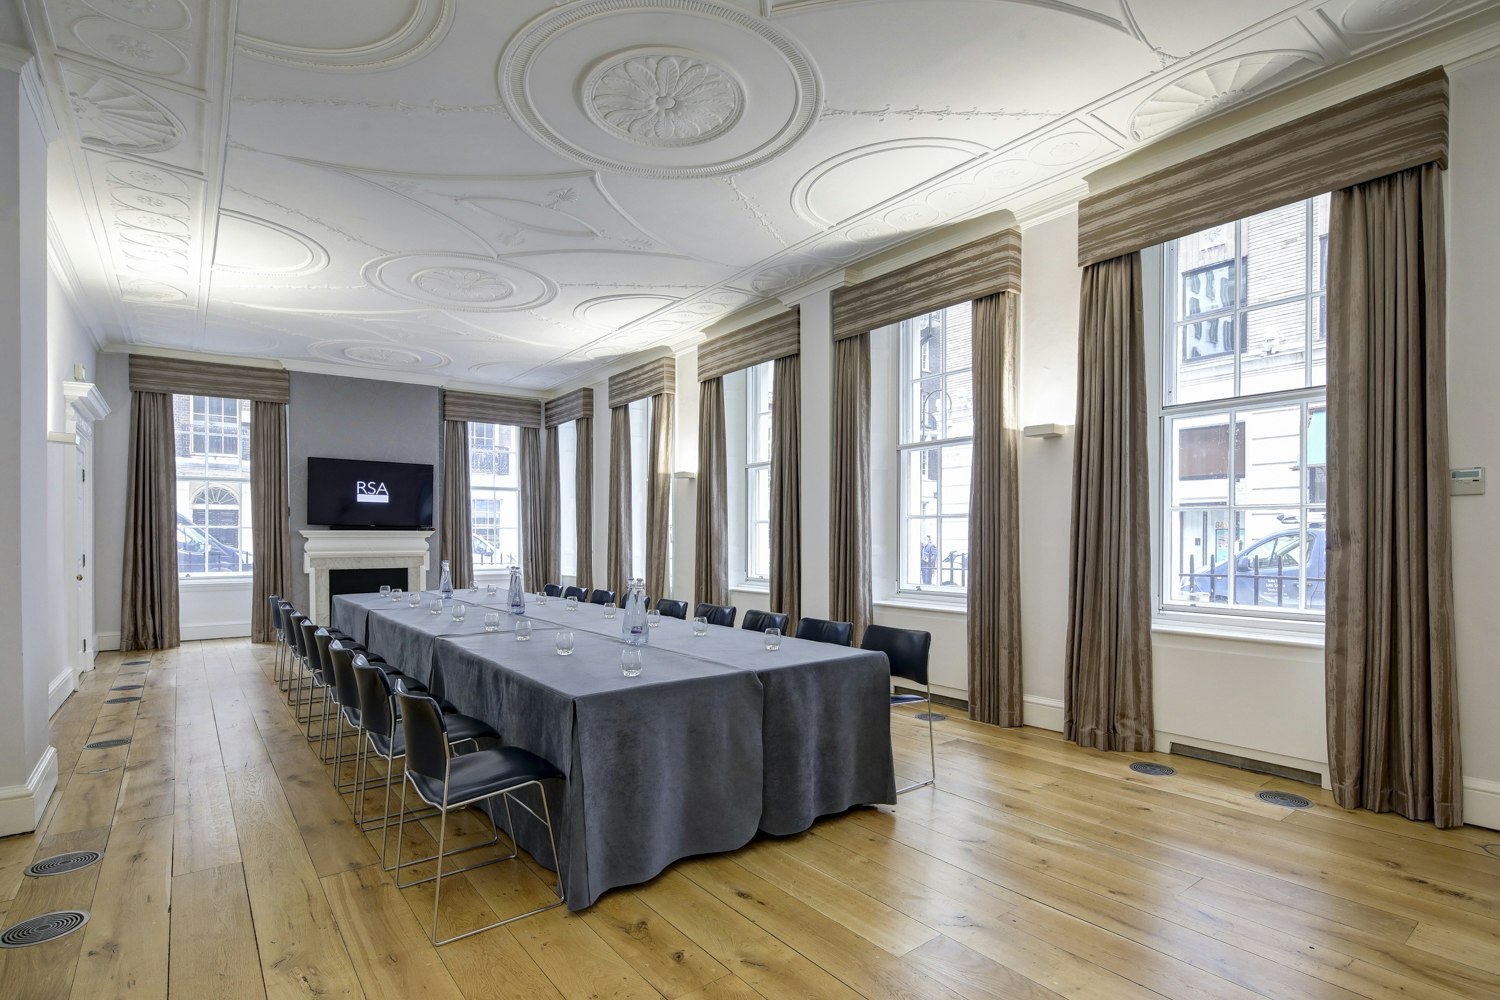 Reception Venues in London - RSA House